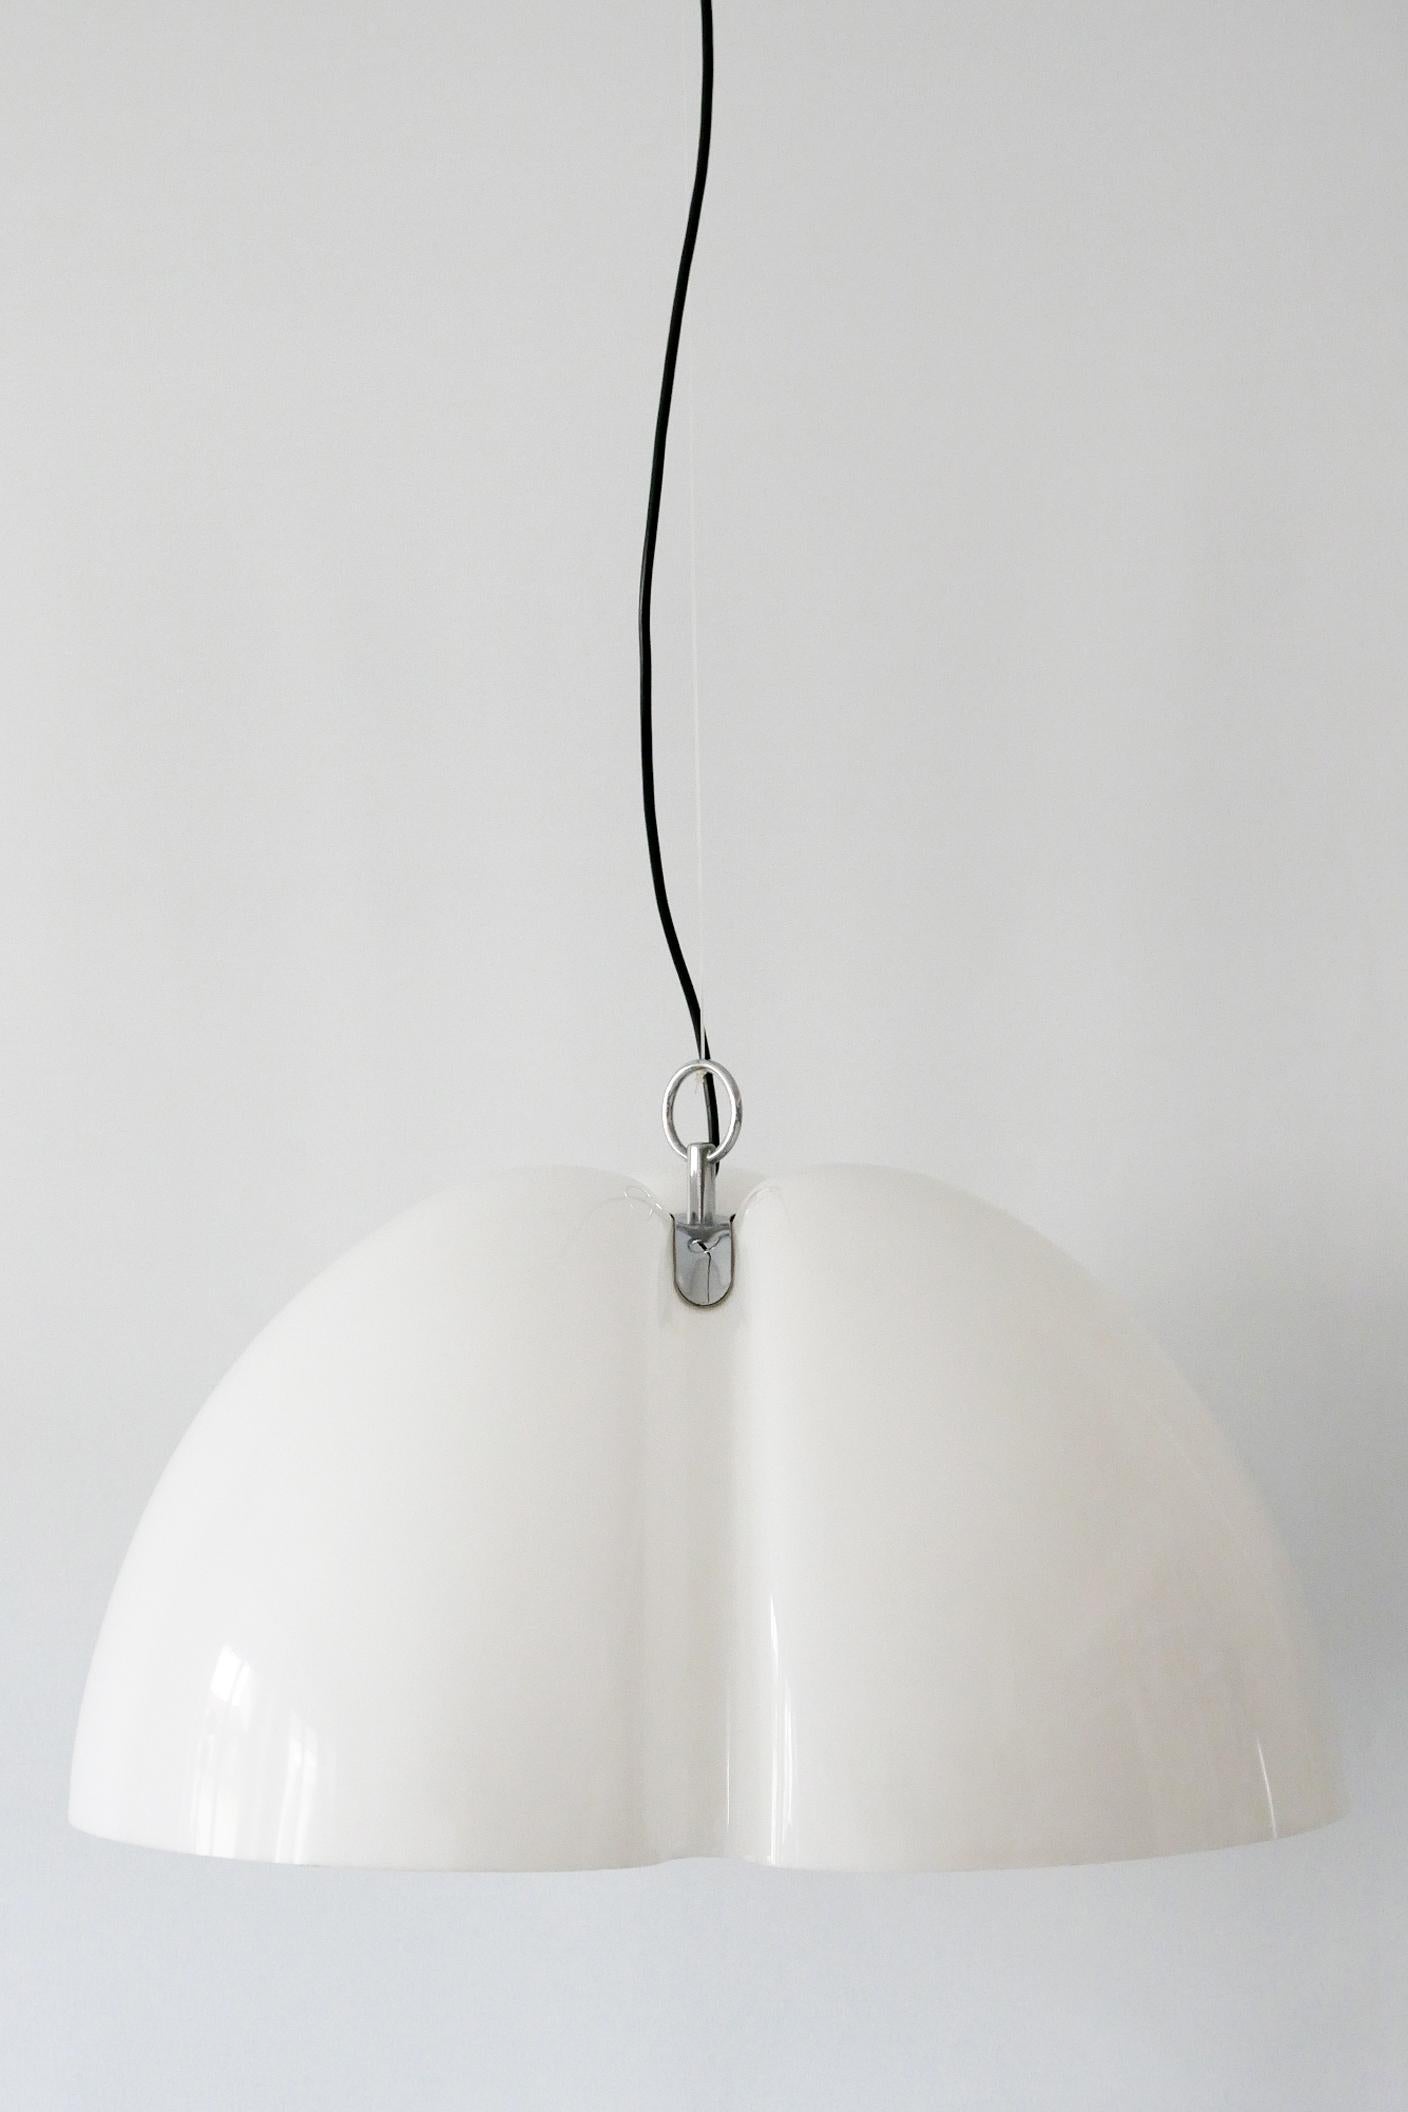 Elegant Mid-Century Modern pendant lamp or hanging light 'Tricena I' by Ingo Maurer, 1968 for Design M, Munich, Germany. Tricena I is the larger one of this model.

Executed in plexiglass and chrome-plated steel, the pendant lamp needs 1 x E27 /